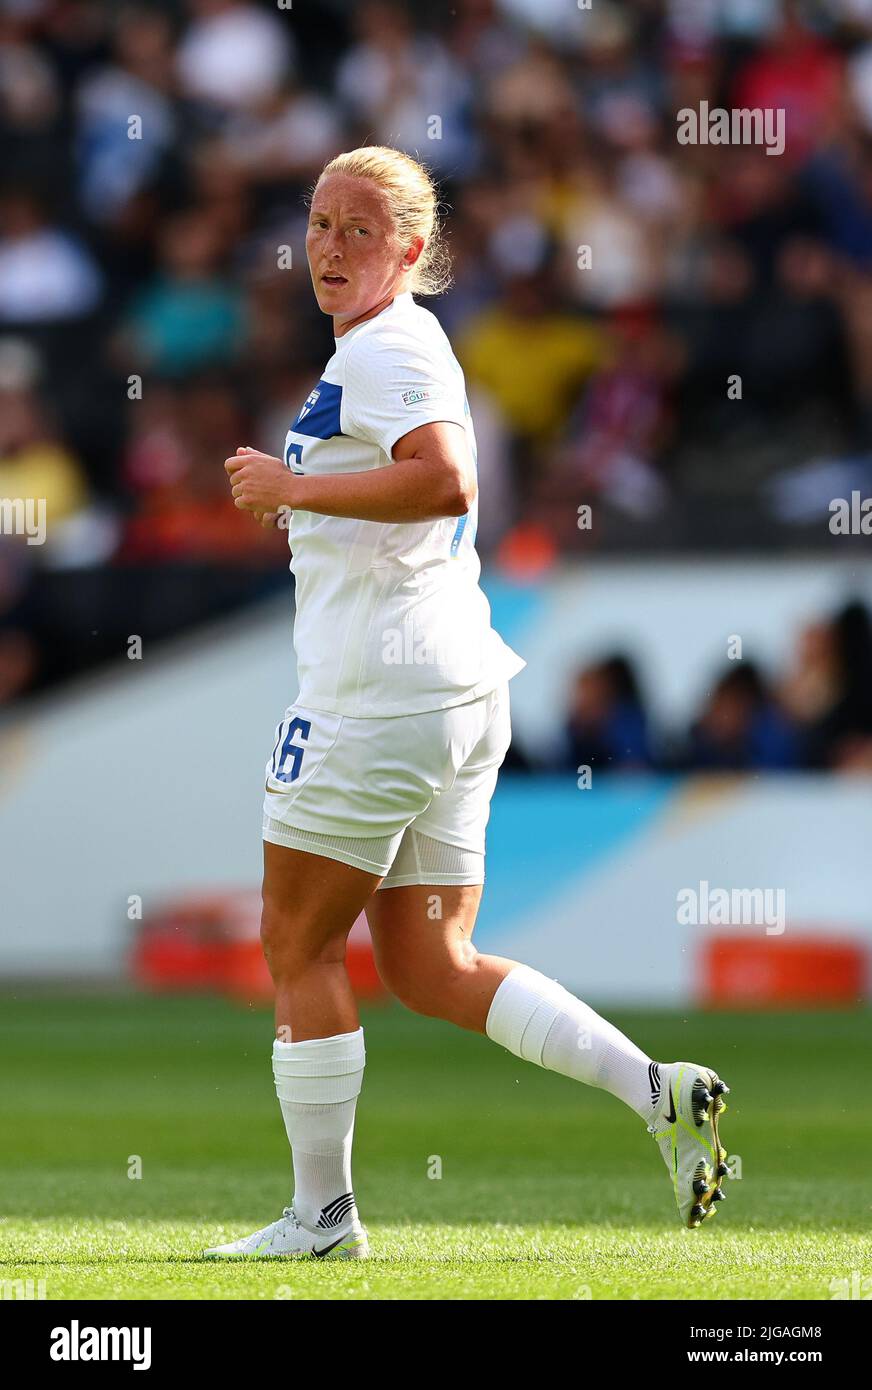 Milton Keynes, England, 8th July 2022. Anna Westerlund of Finland during the UEFA Women's European Championship 2022 match at Stadium:mk, Milton Keynes. Picture credit should read: David Klein / Sportimage Credit: Sportimage/Alamy Live News Stock Photo